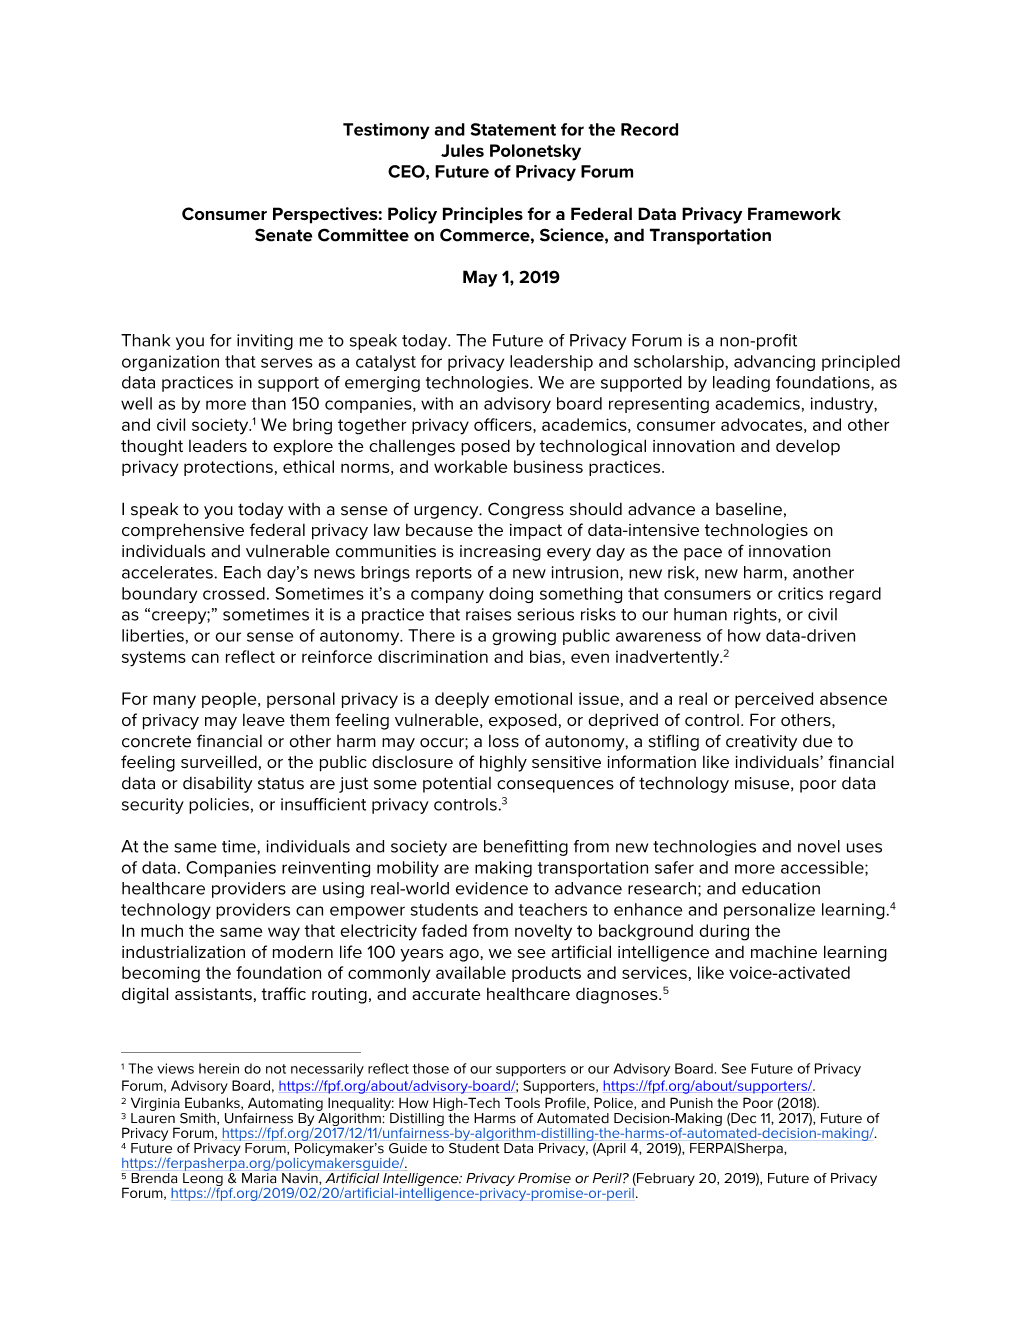 Testimony and Statement for the Record Jules Polonetsky CEO, Future of Privacy Forum Consumer Perspectives